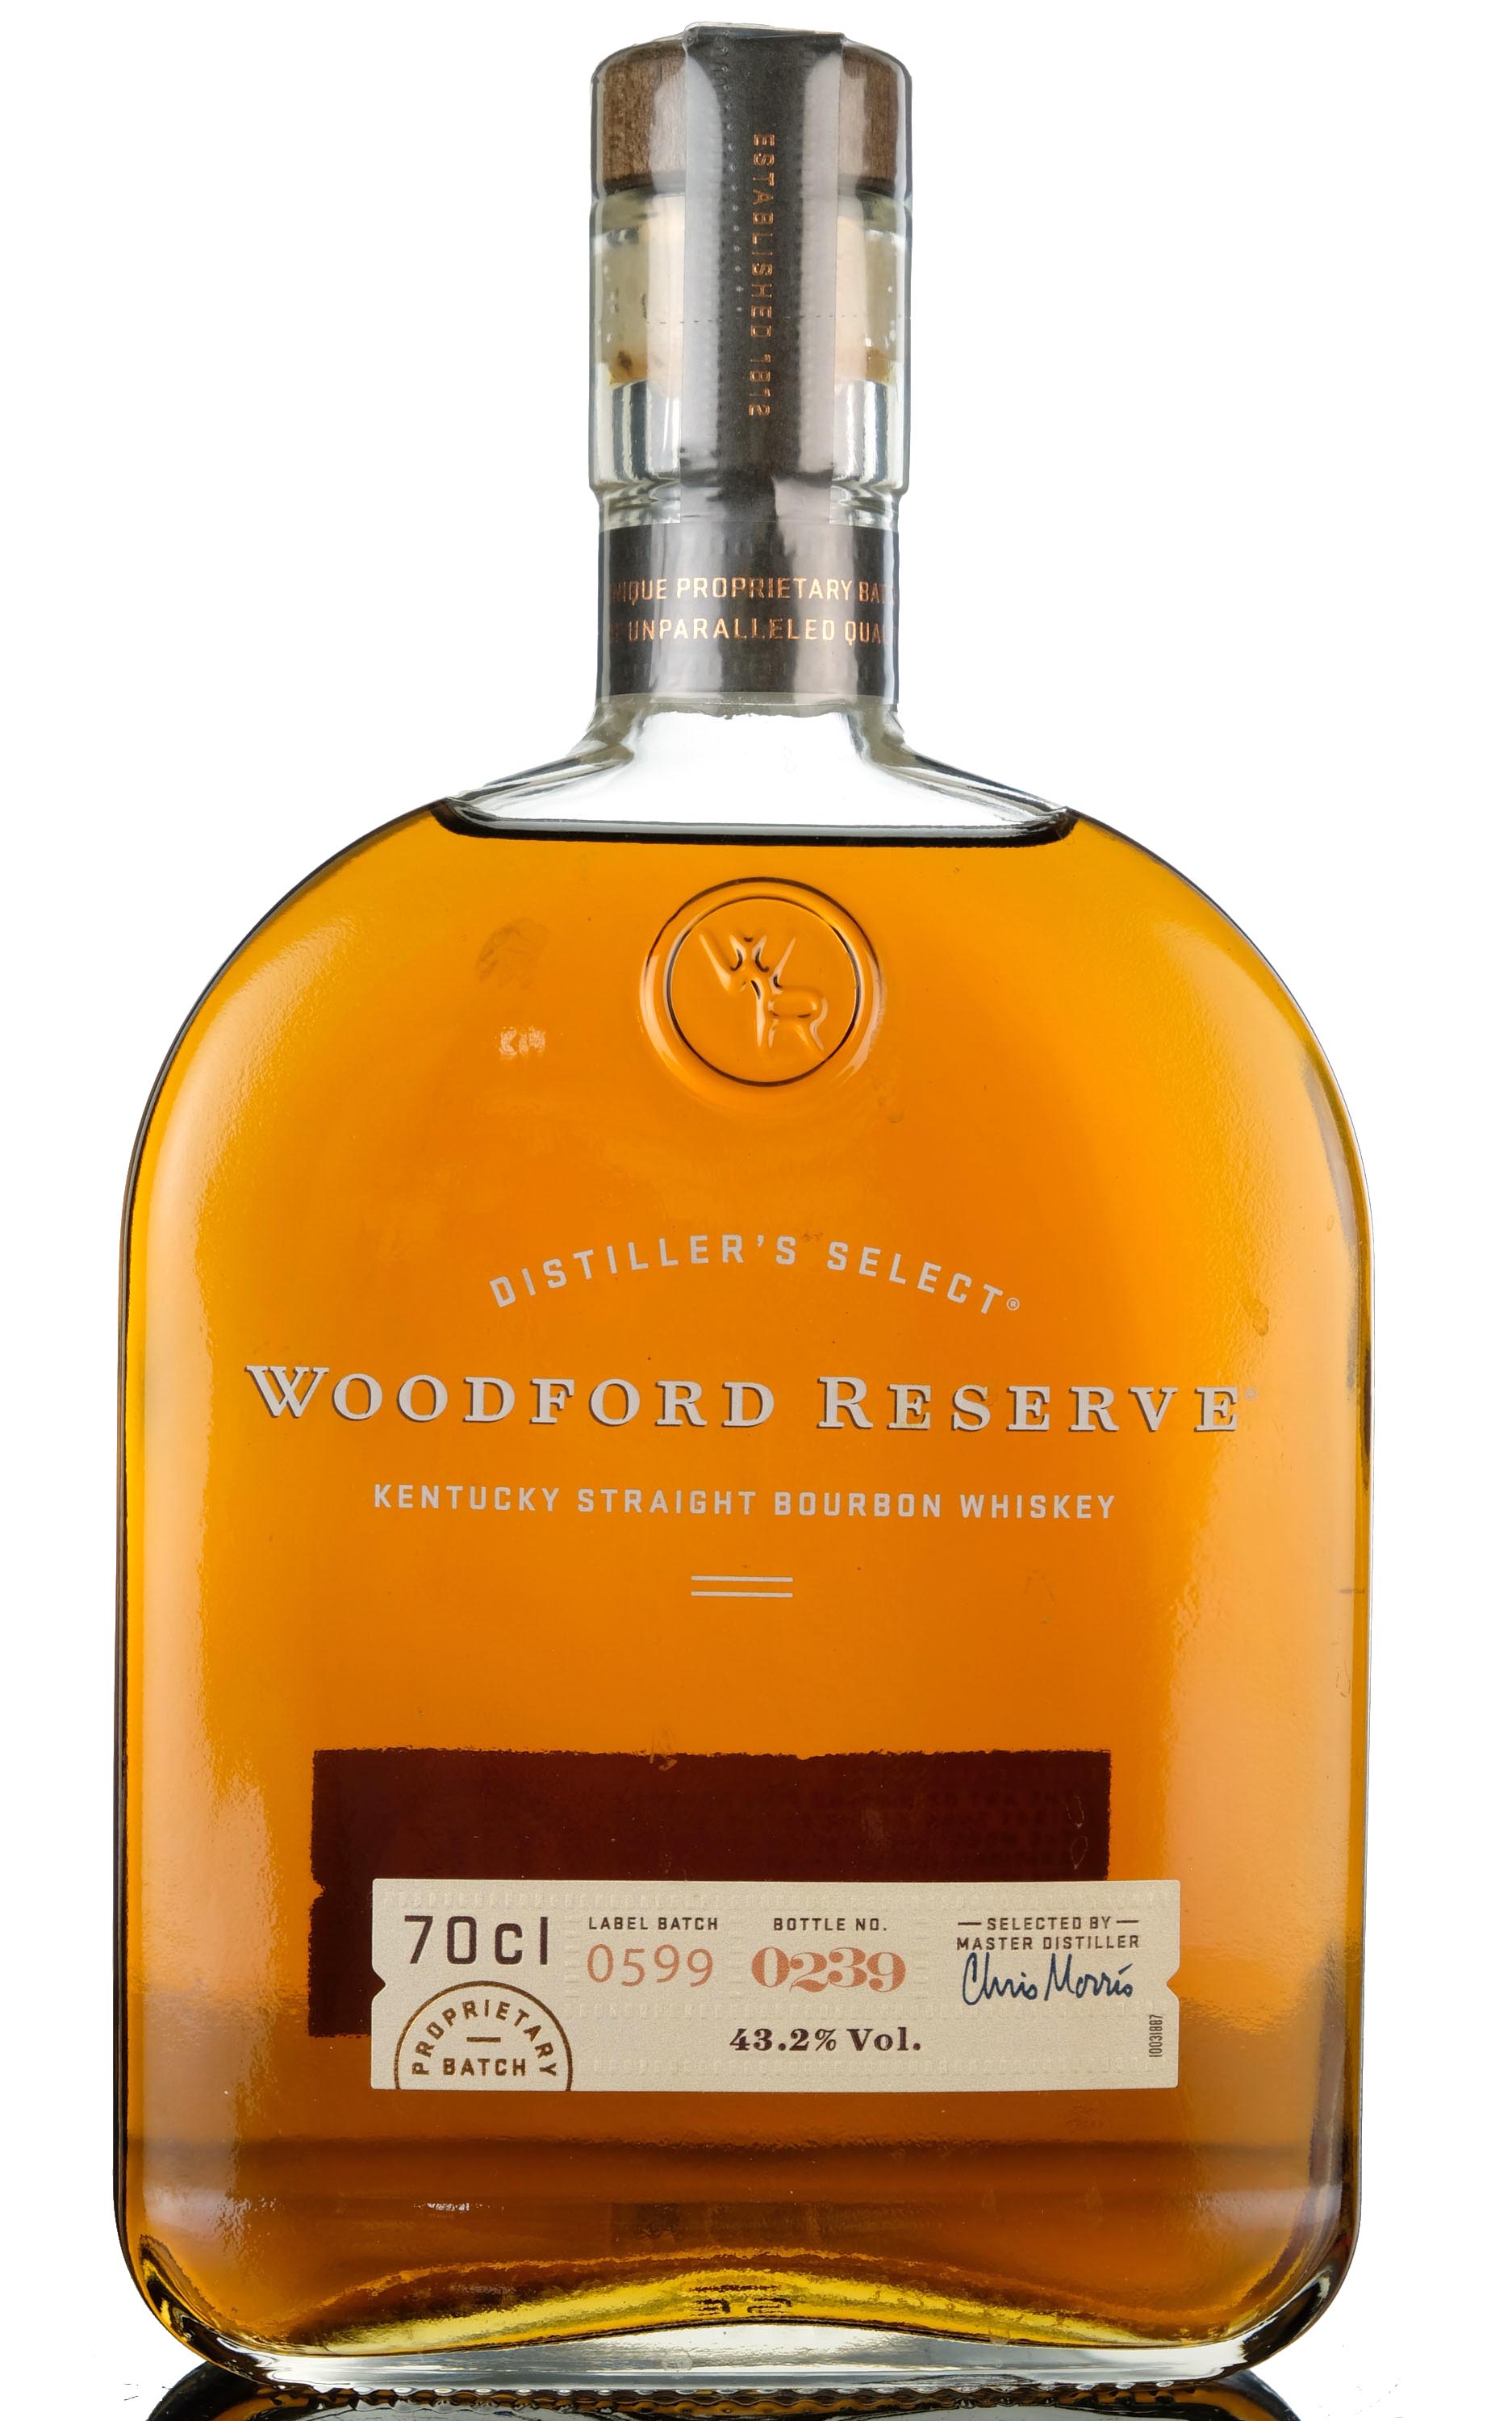 Woodford Reserve - Distillers Select - Kentucky Straight Bourbon Whiskey